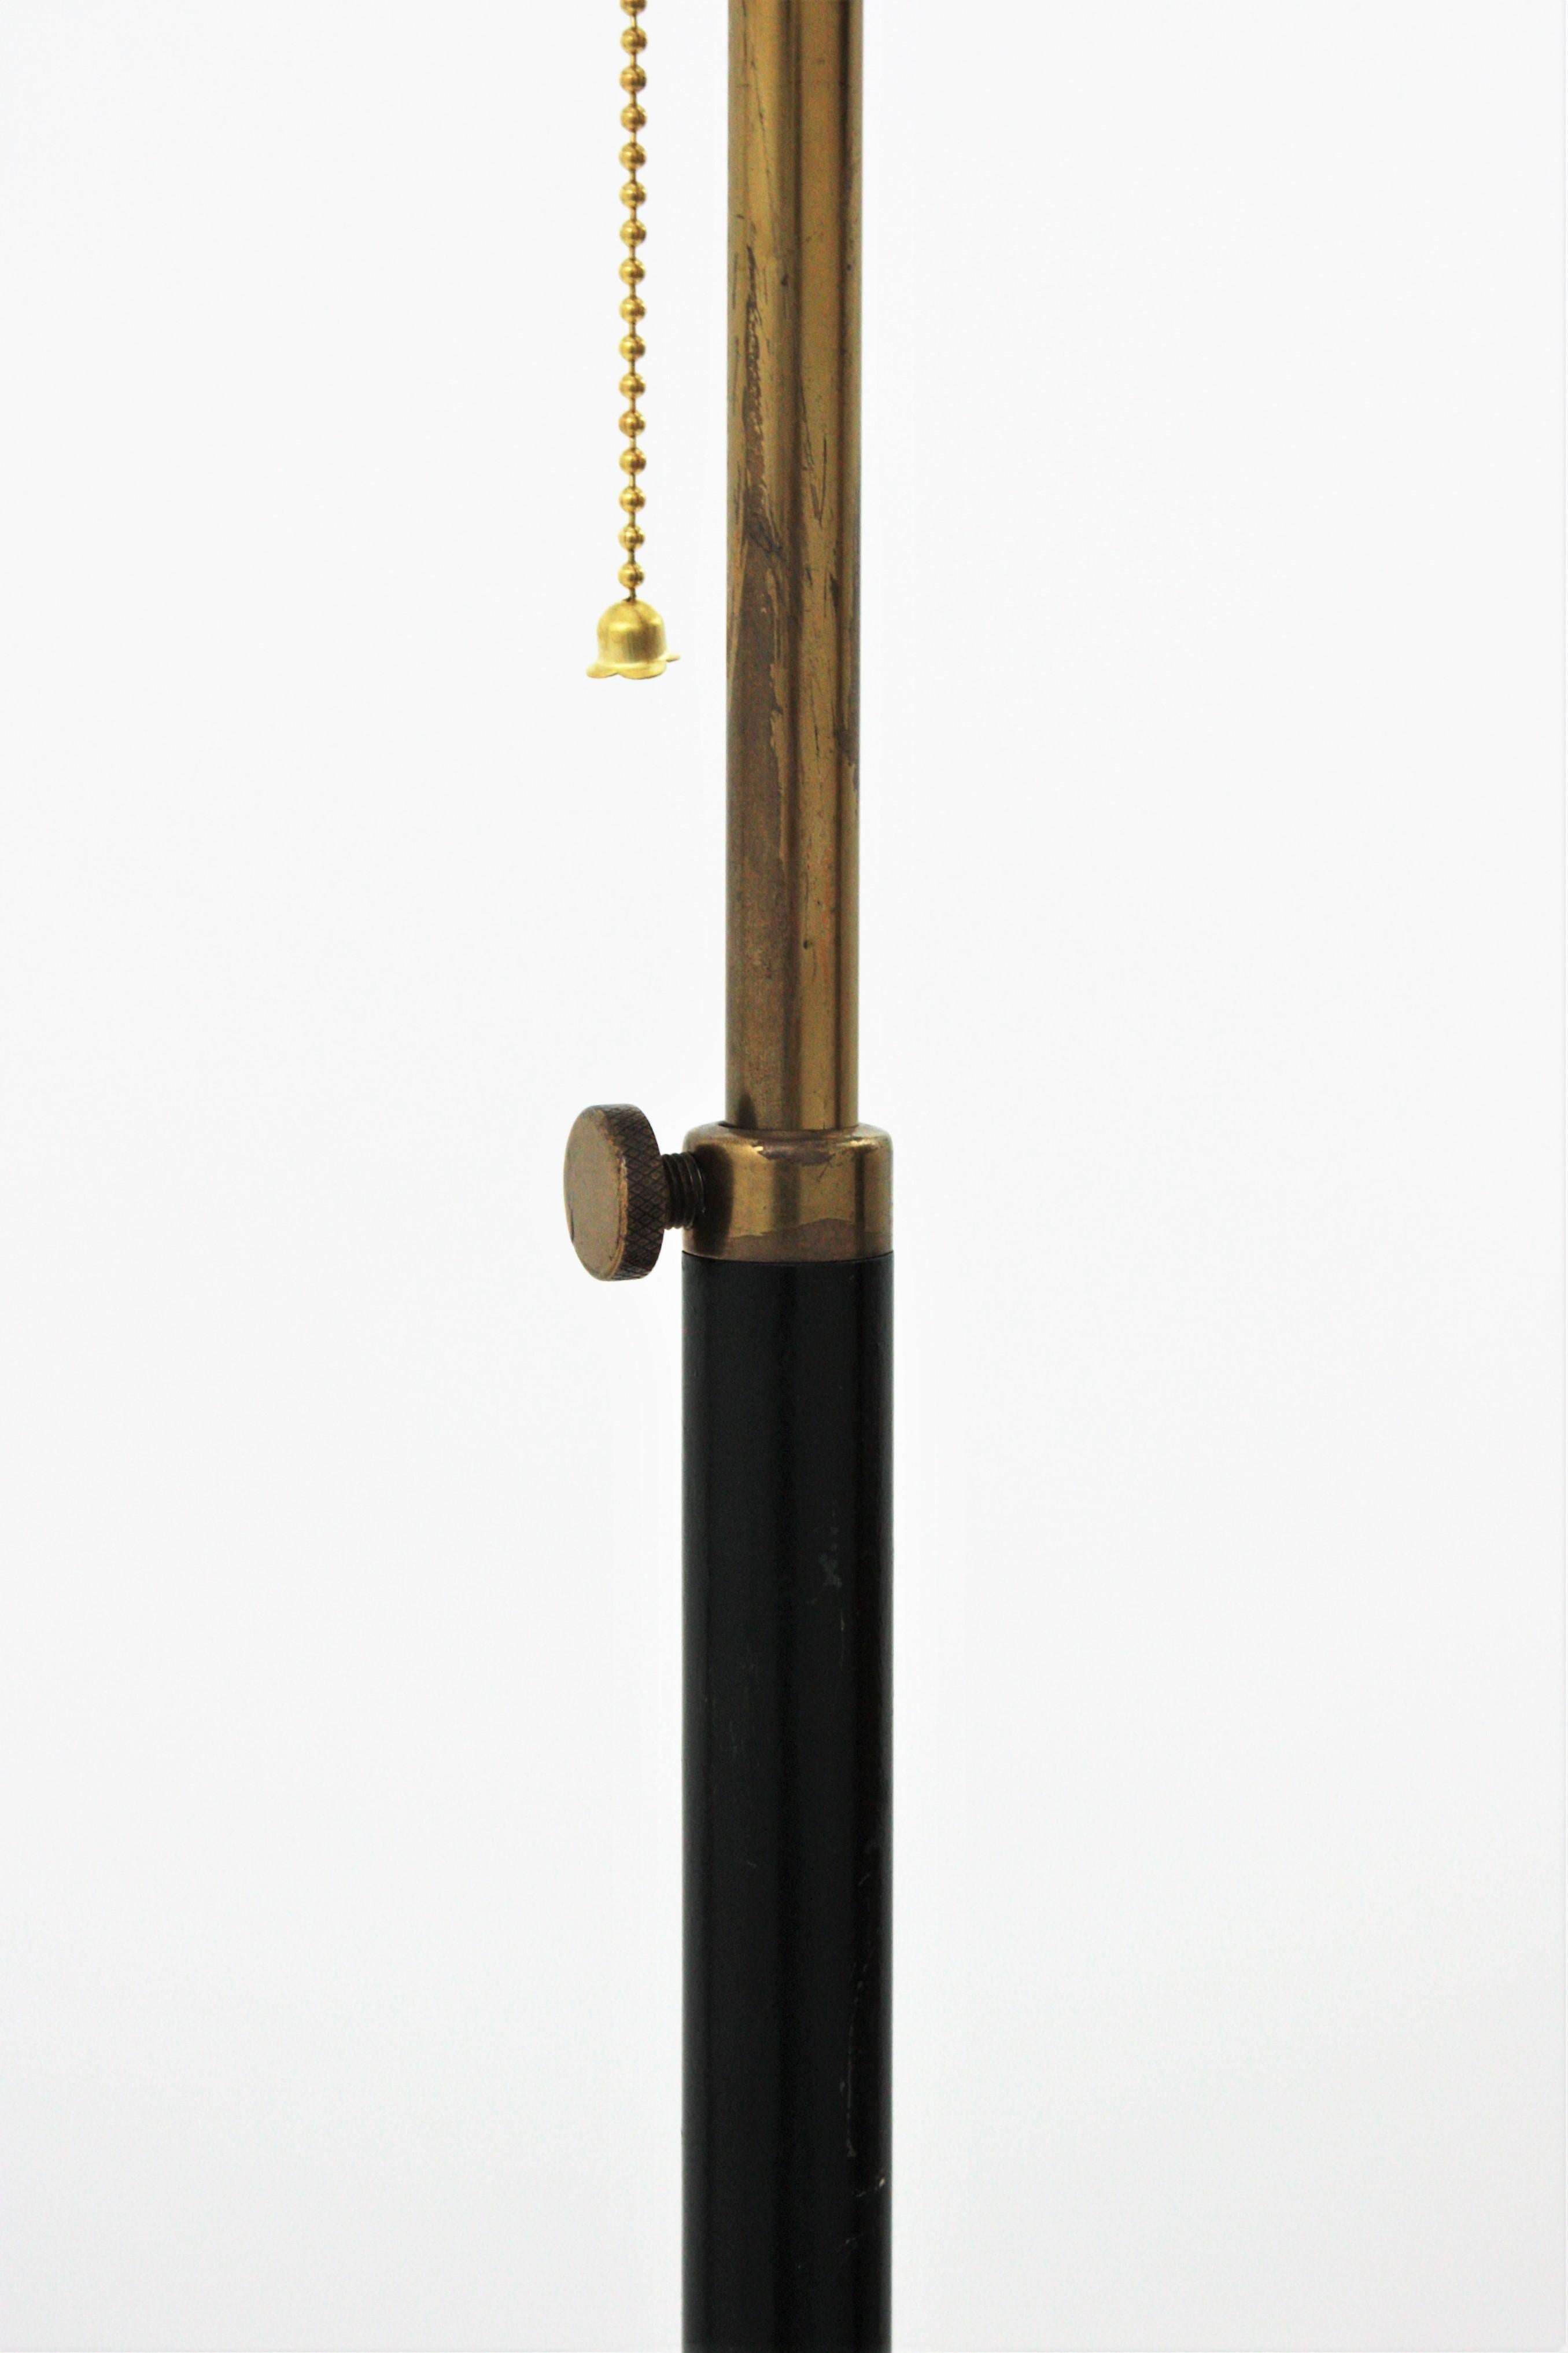 Stilnovo Tripod Floor Lamp in Black Lacquered Metal and Brass For Sale 3